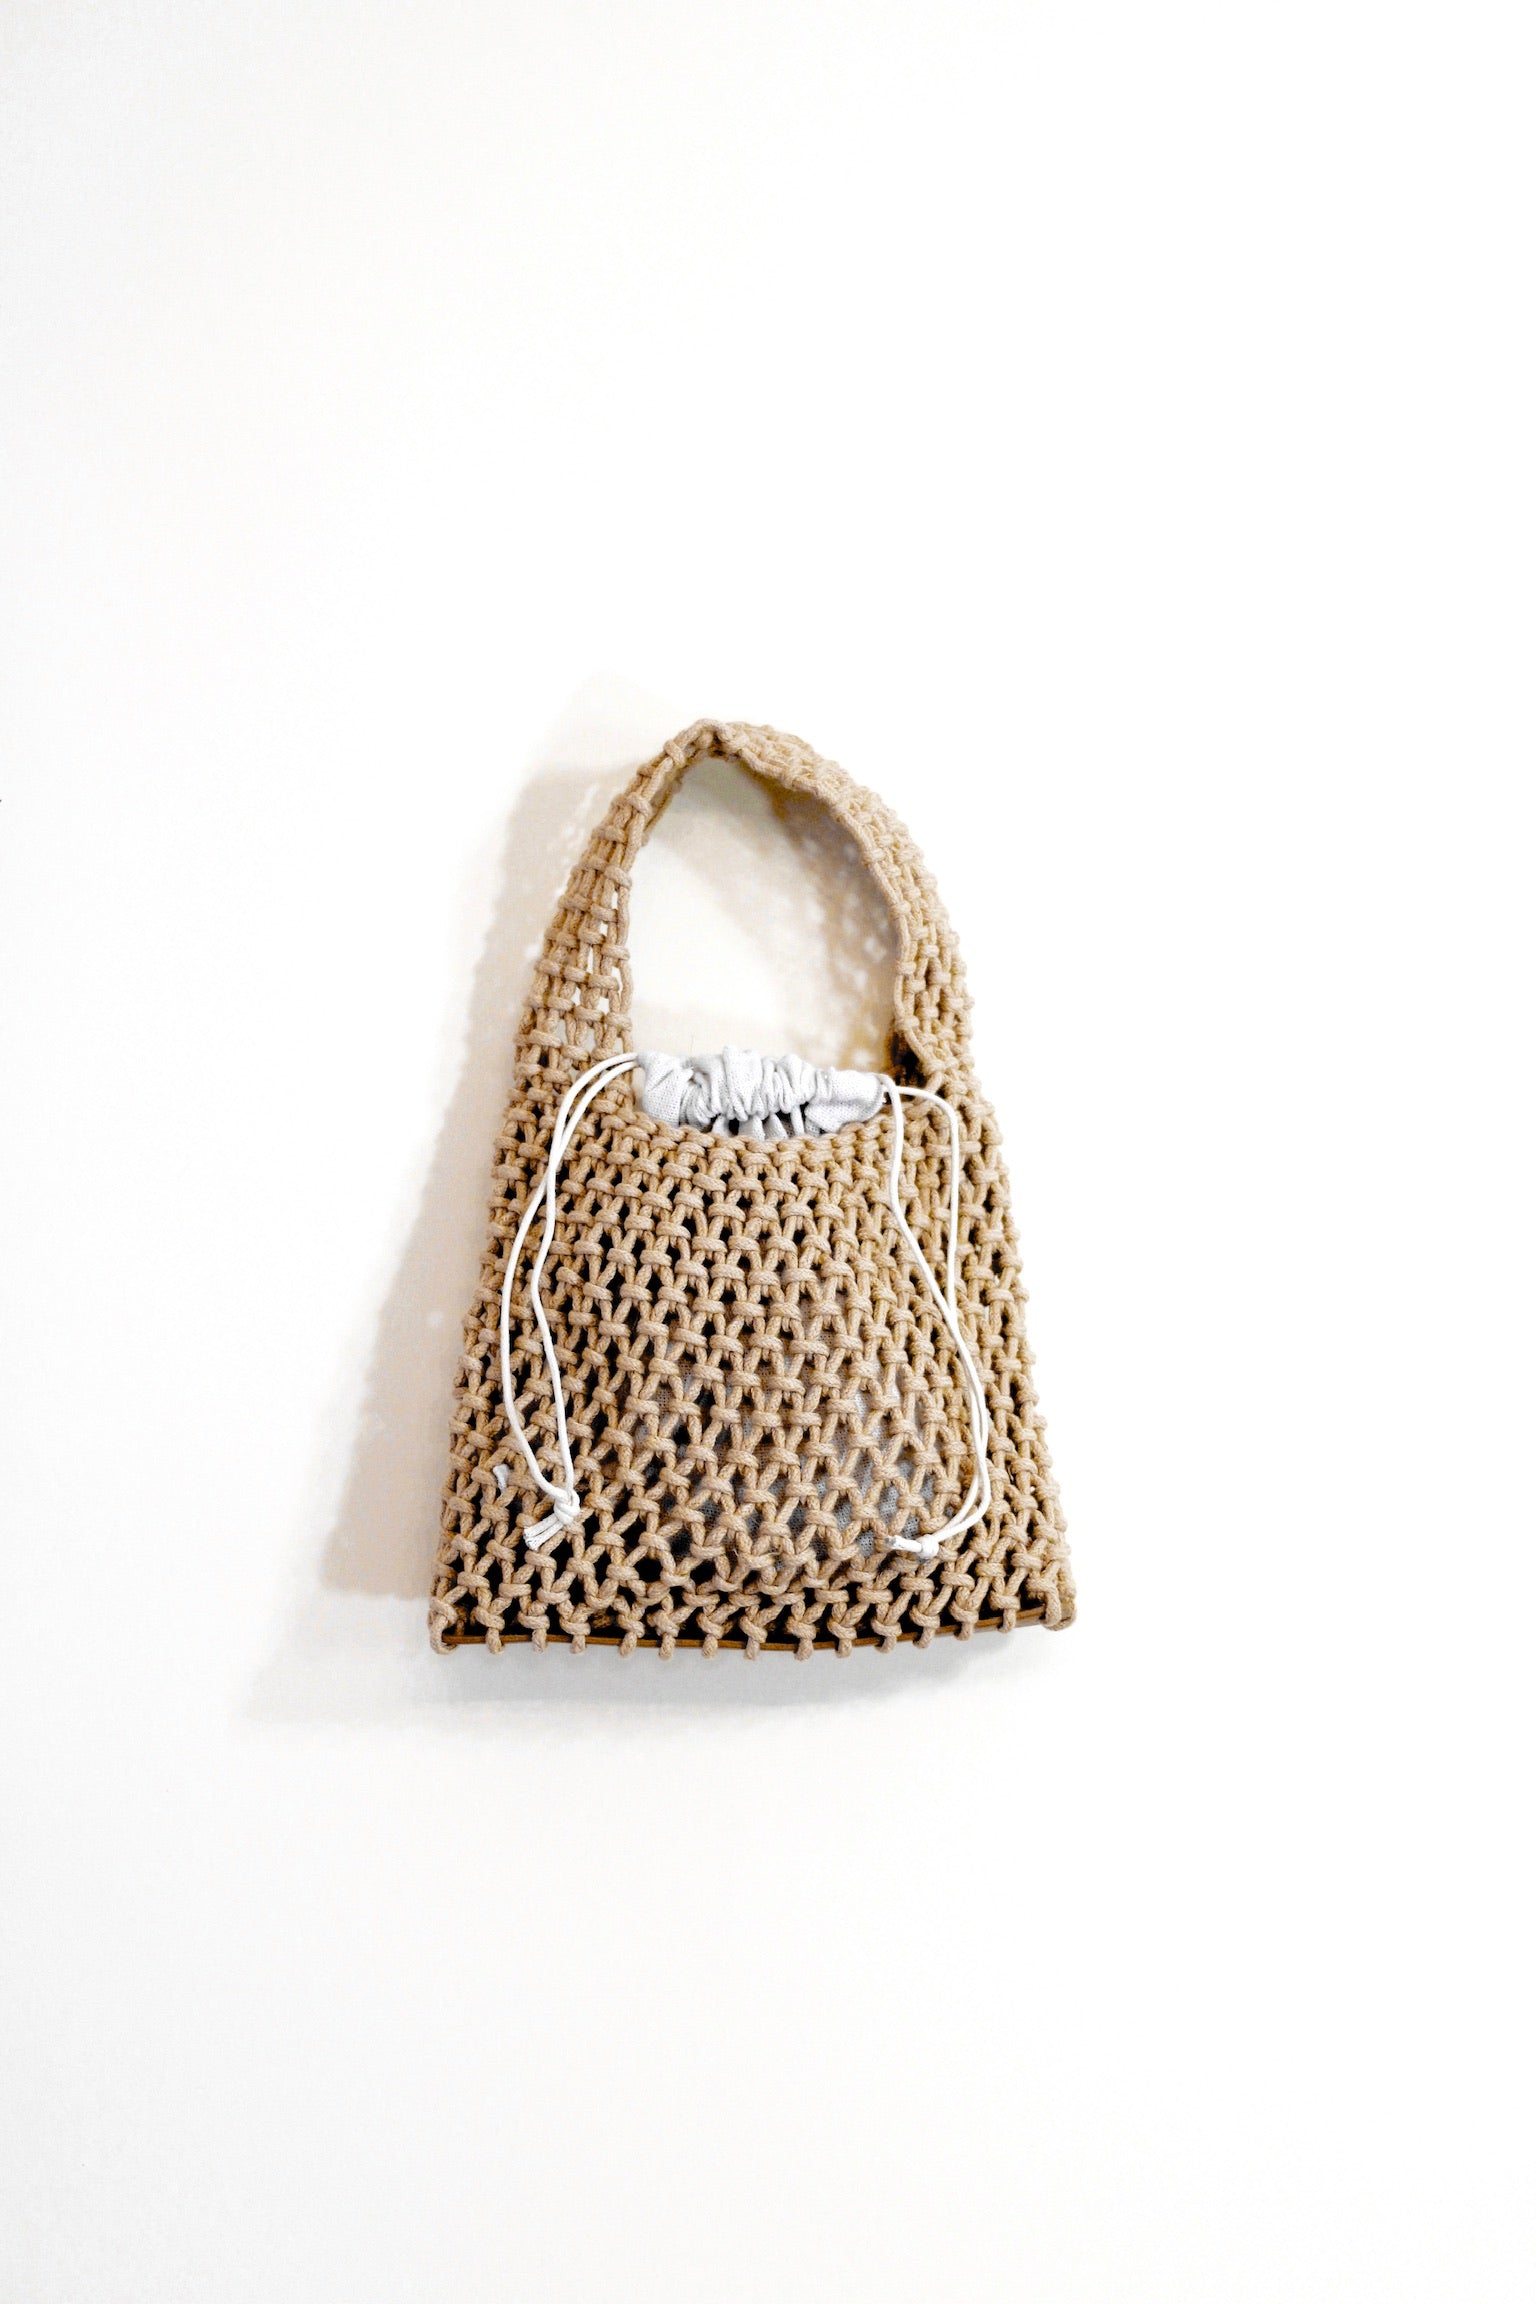 Natural Crochet Woven Mesh Bag | Collective Request 